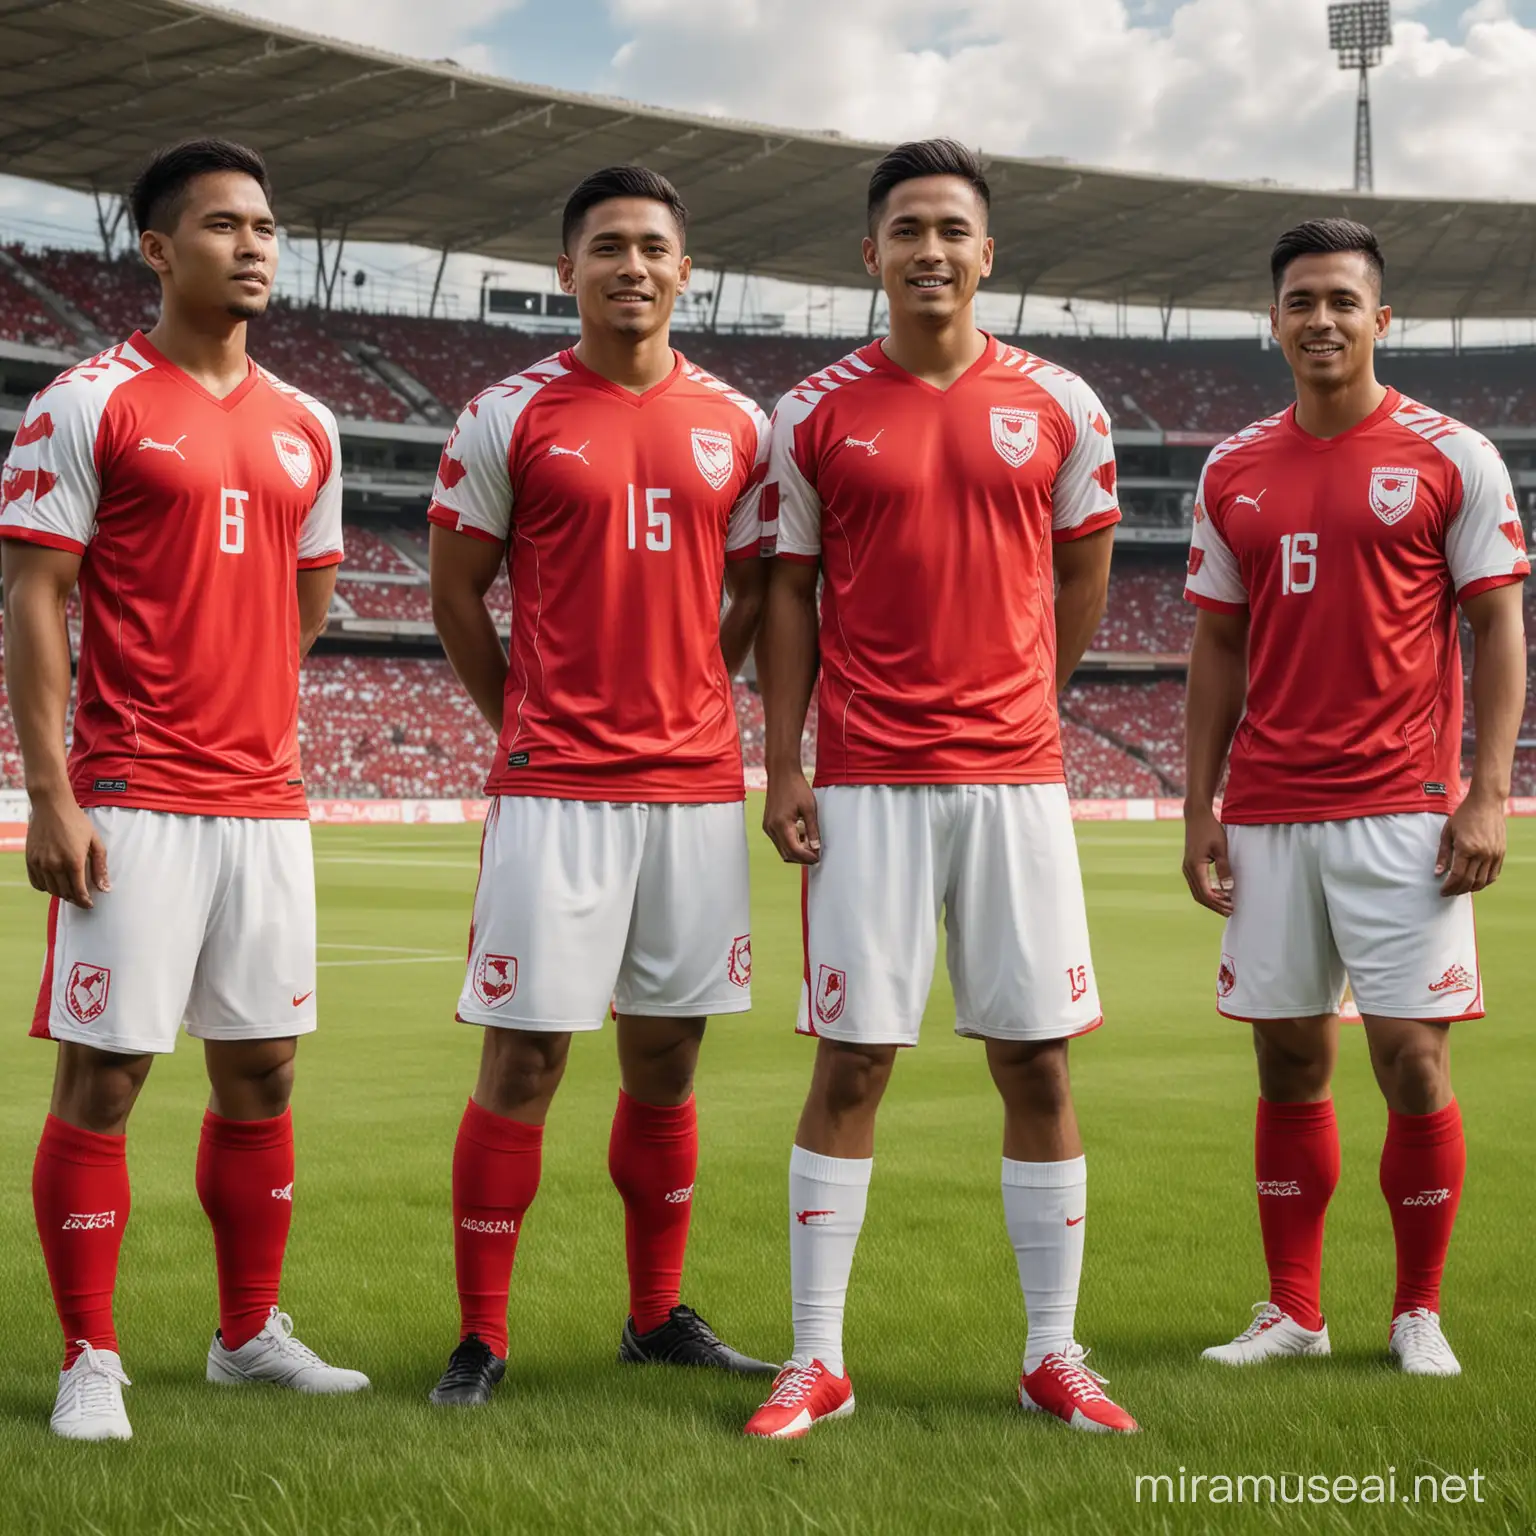 3D photo of the Indonesian men's soccer team, wearing white shorts with beautiful outlines and red t-shirts from the Indonesian national soccer team. Maracanã stadium background, grassy field, handsome man, 16k, high resolution, in open shot.